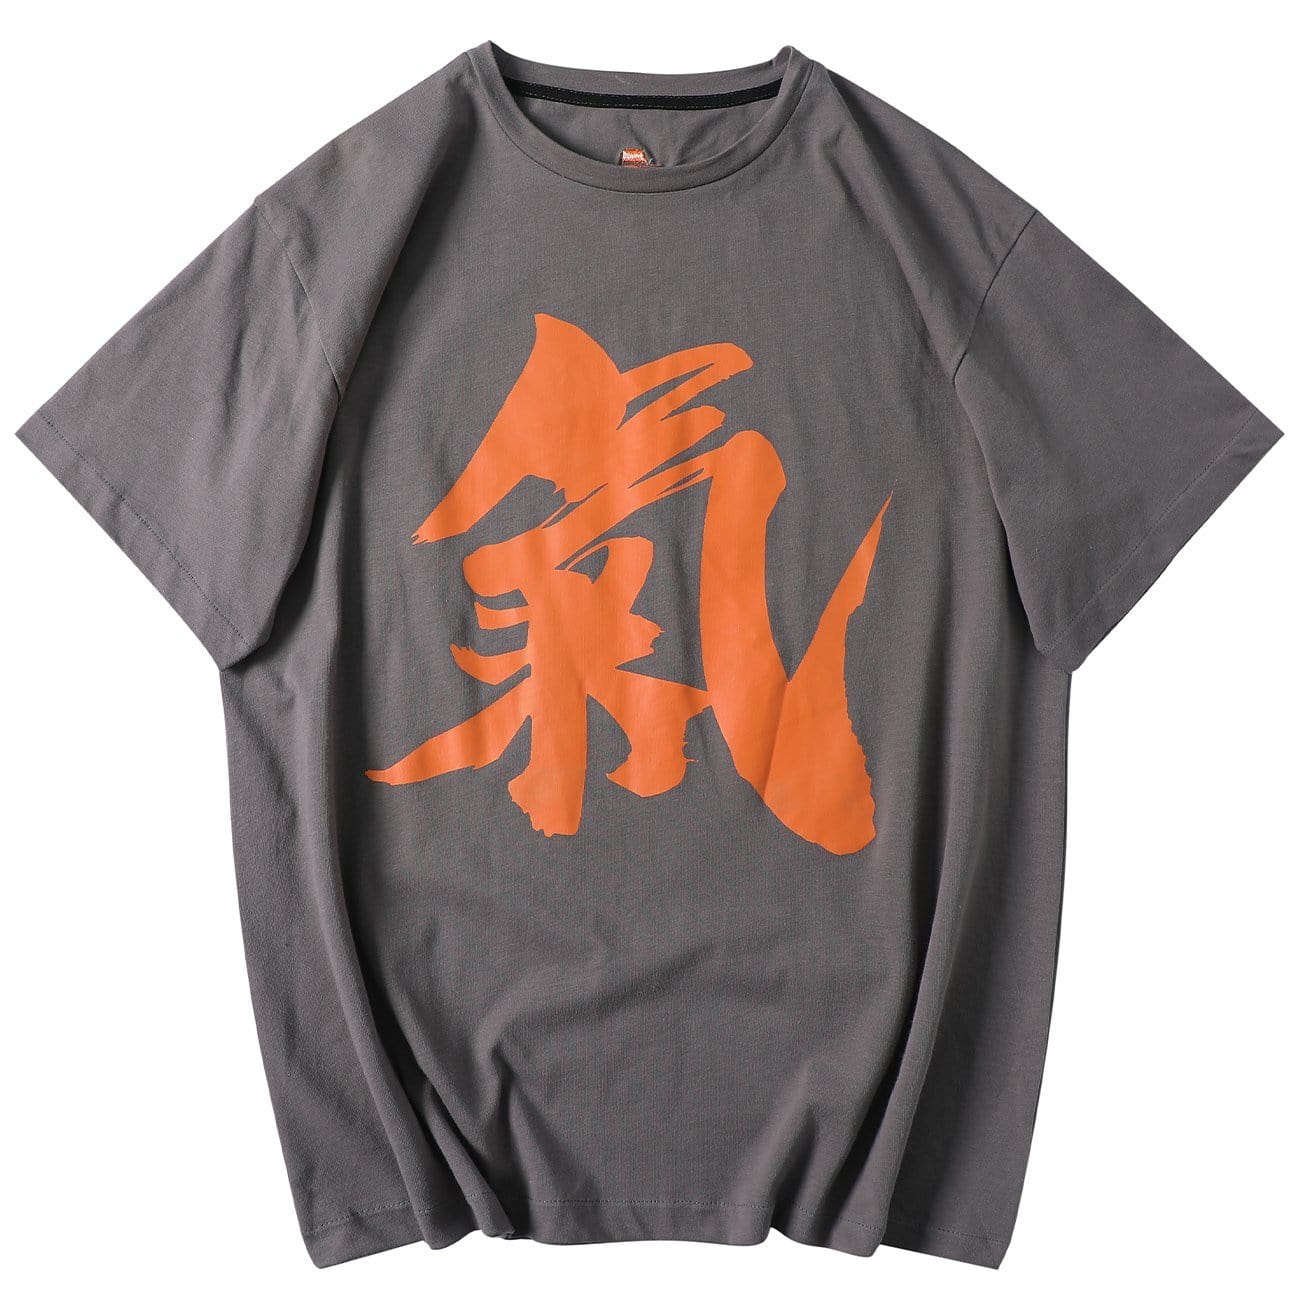 Functional Chinese Printed T-Shirt